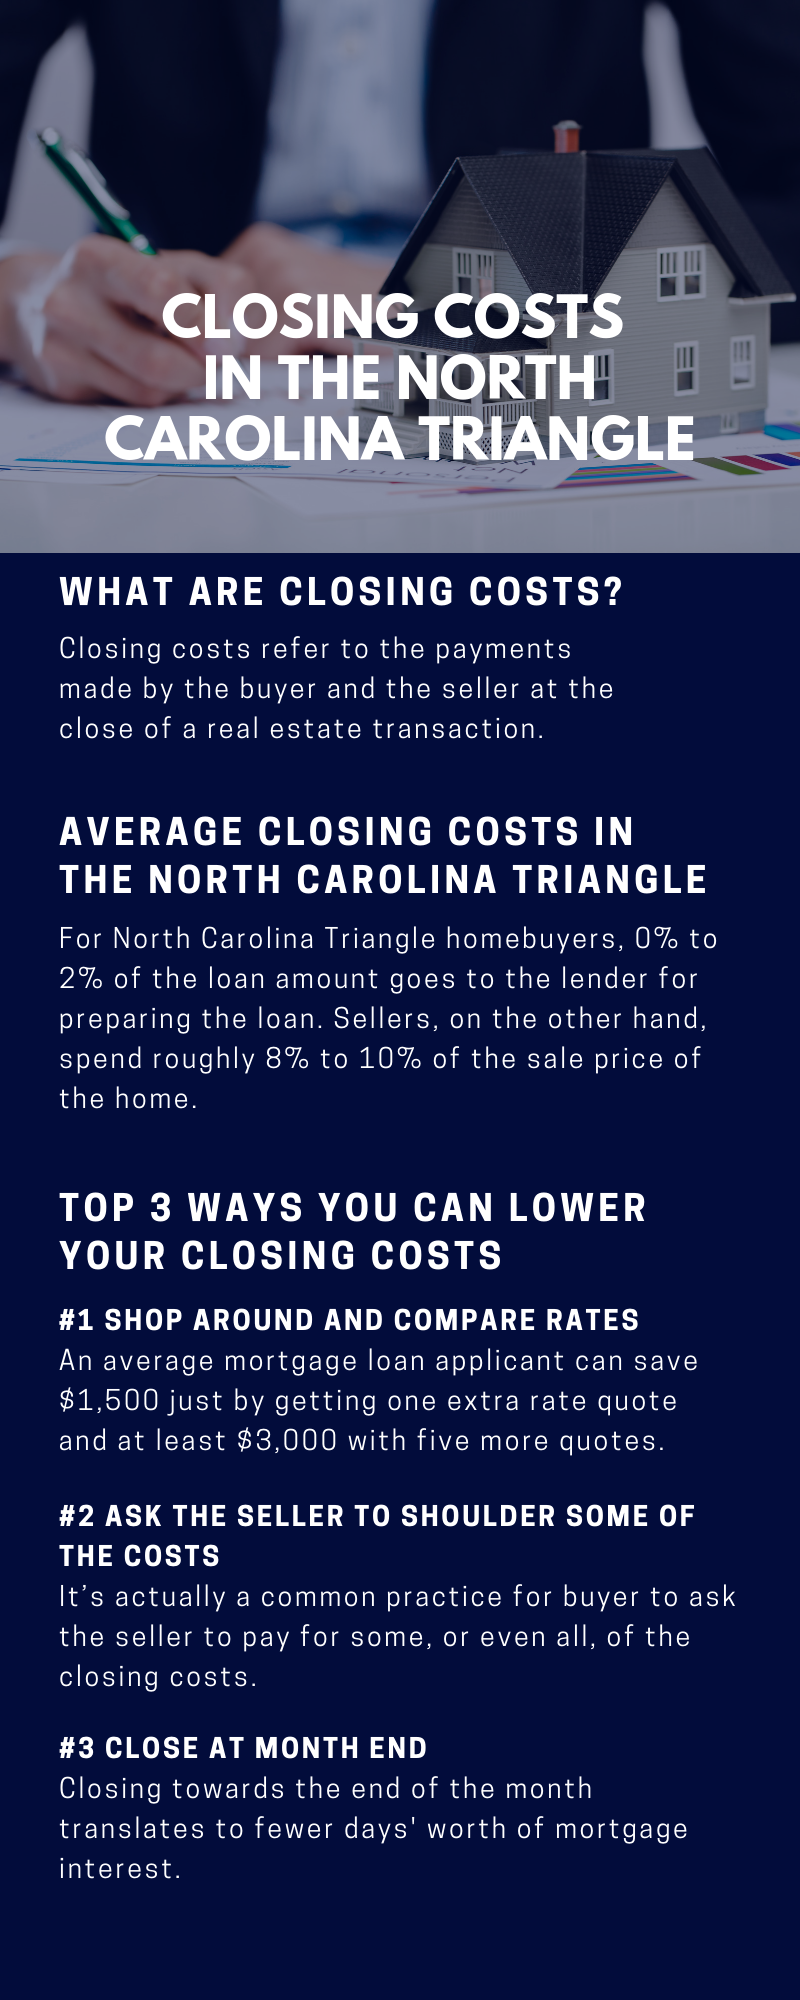 Infographic Showing the Closing Costs in the North Carolina Triangle Area